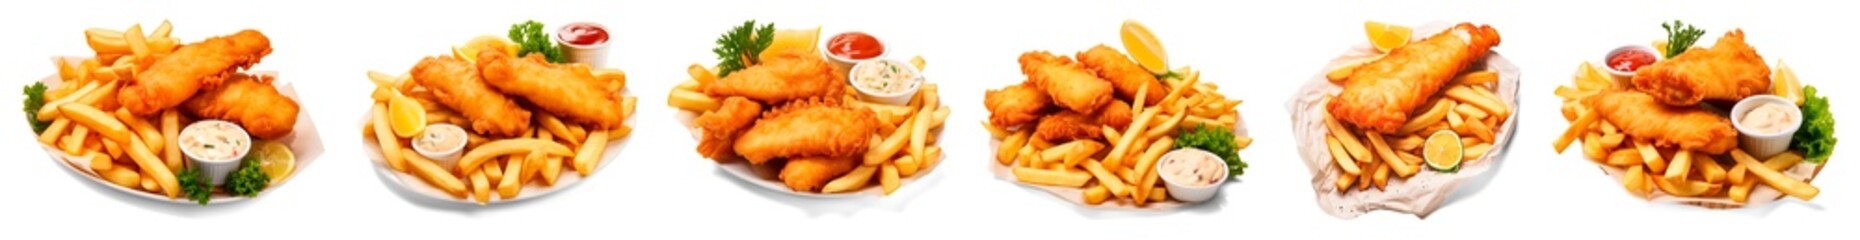 fish and chips on a plate with gravy